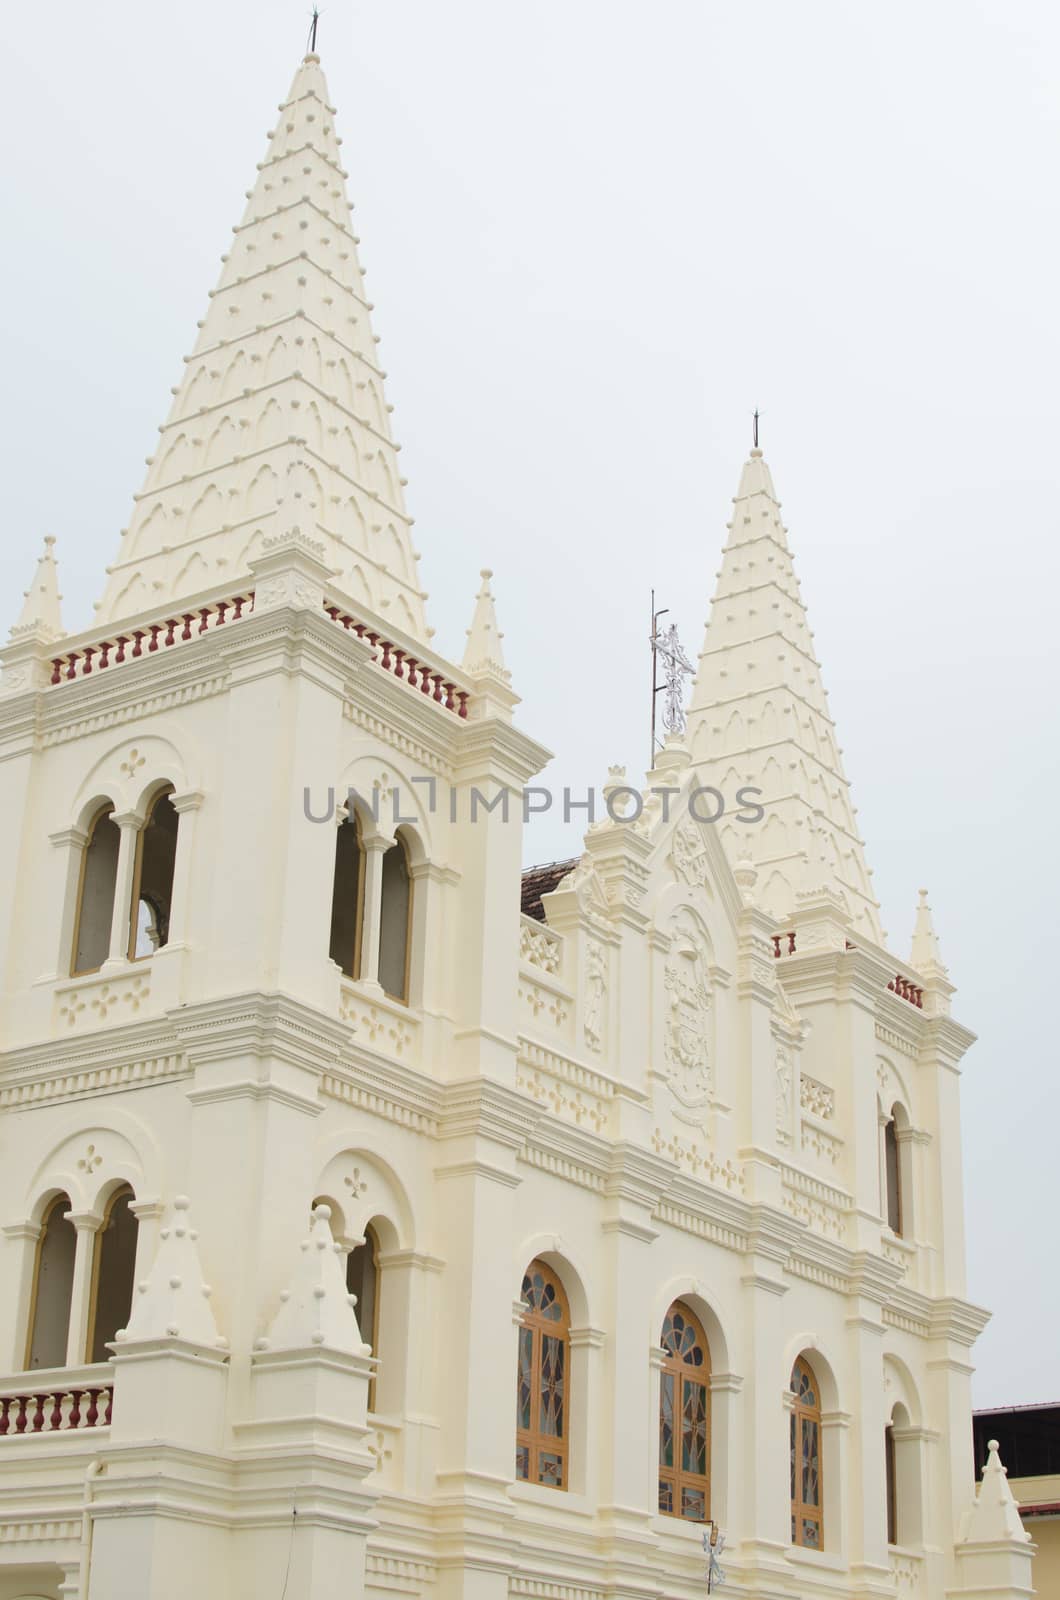 St. Francis Church, in Fort Kochi (Fort Cochin), Kochi, originally built in 1503, is the oldest European church in India